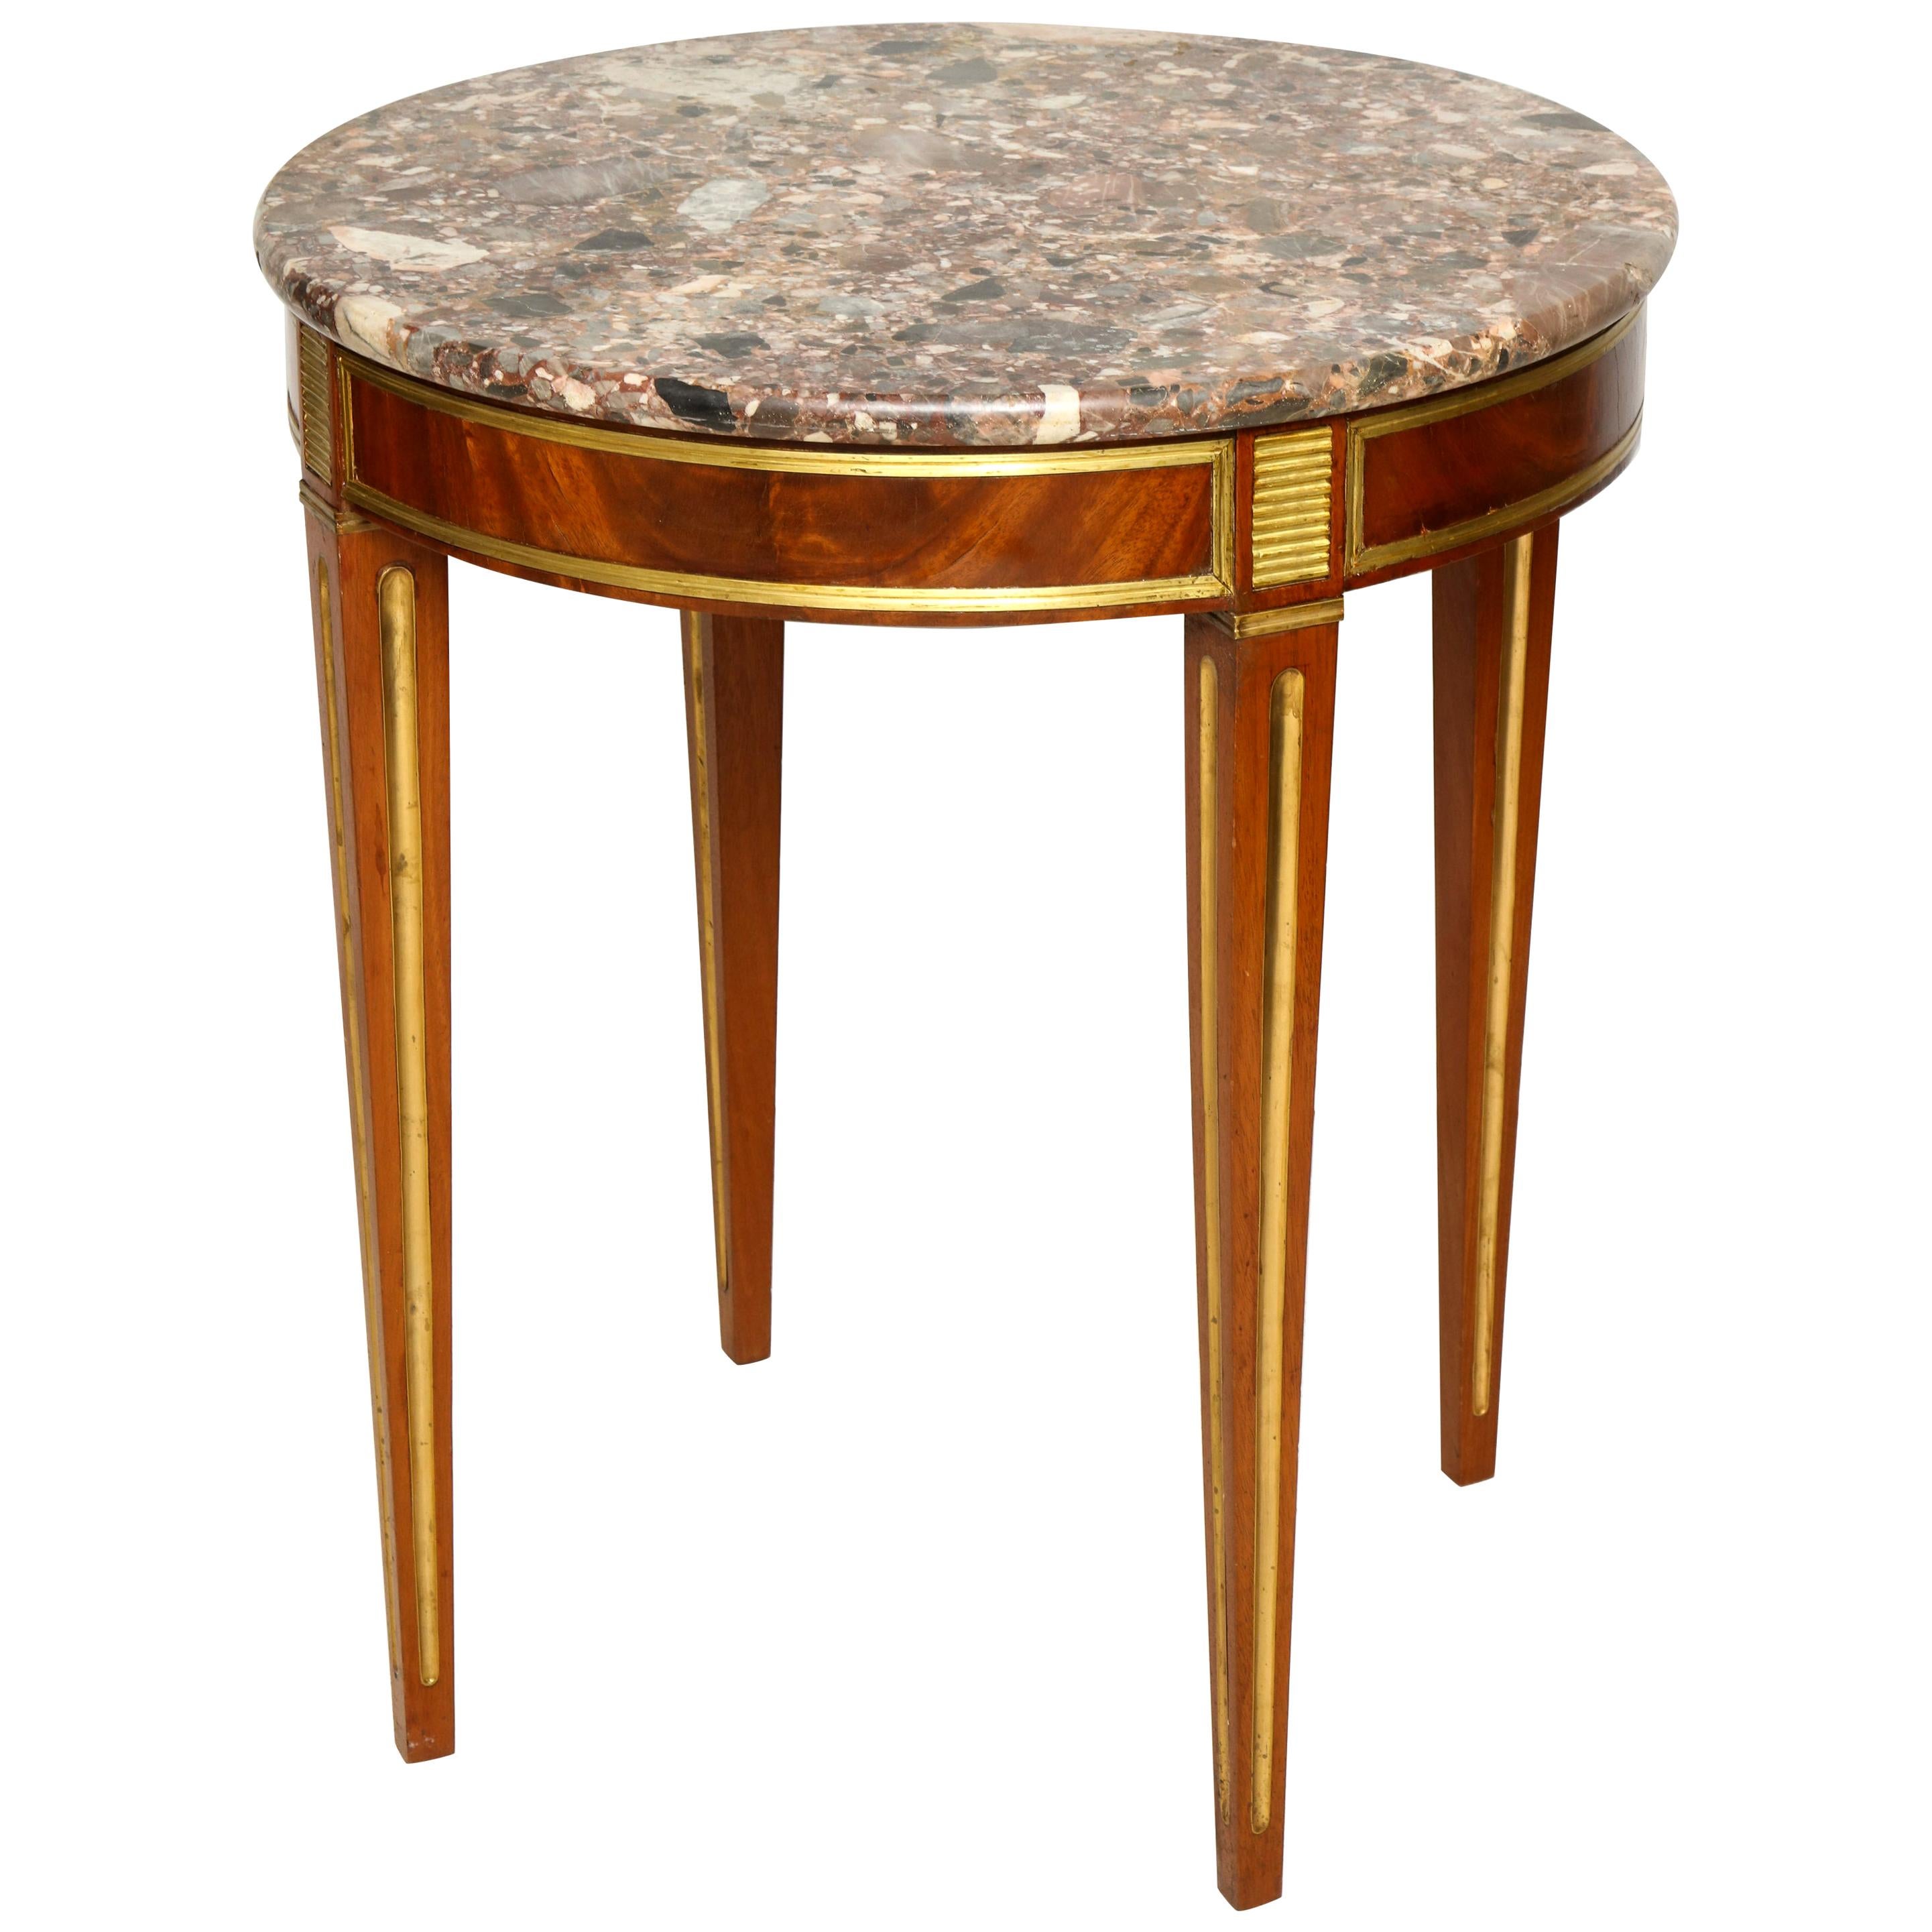 Brass Inlaid Marble-Top Table in the Neoclassic Manner